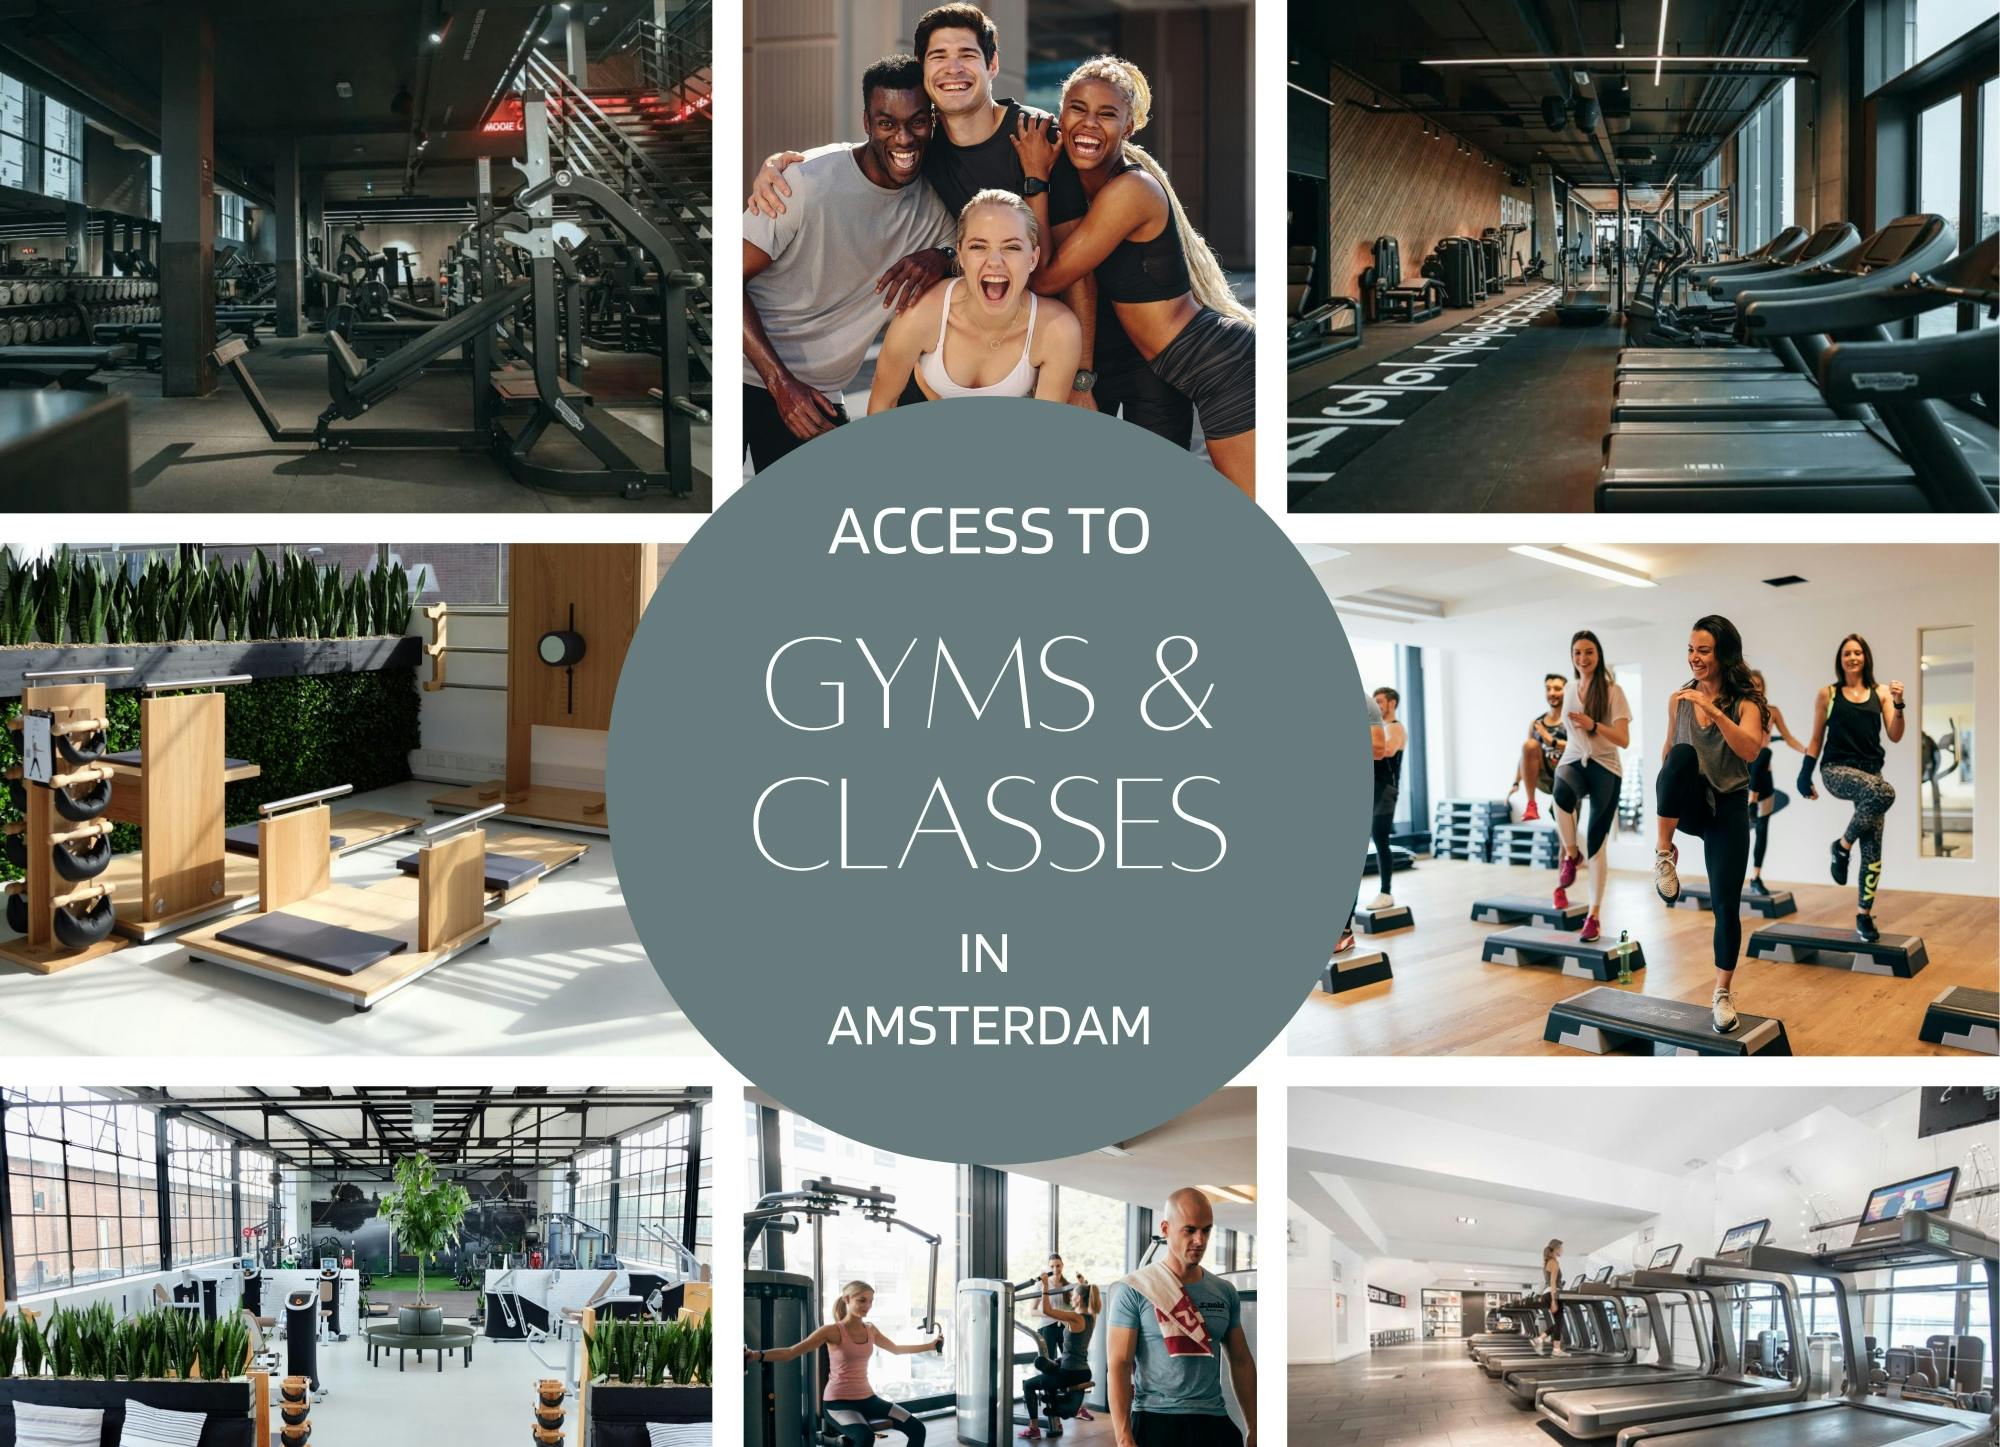 Amsterdam fitness pass for 1, 2 or 4 entrances